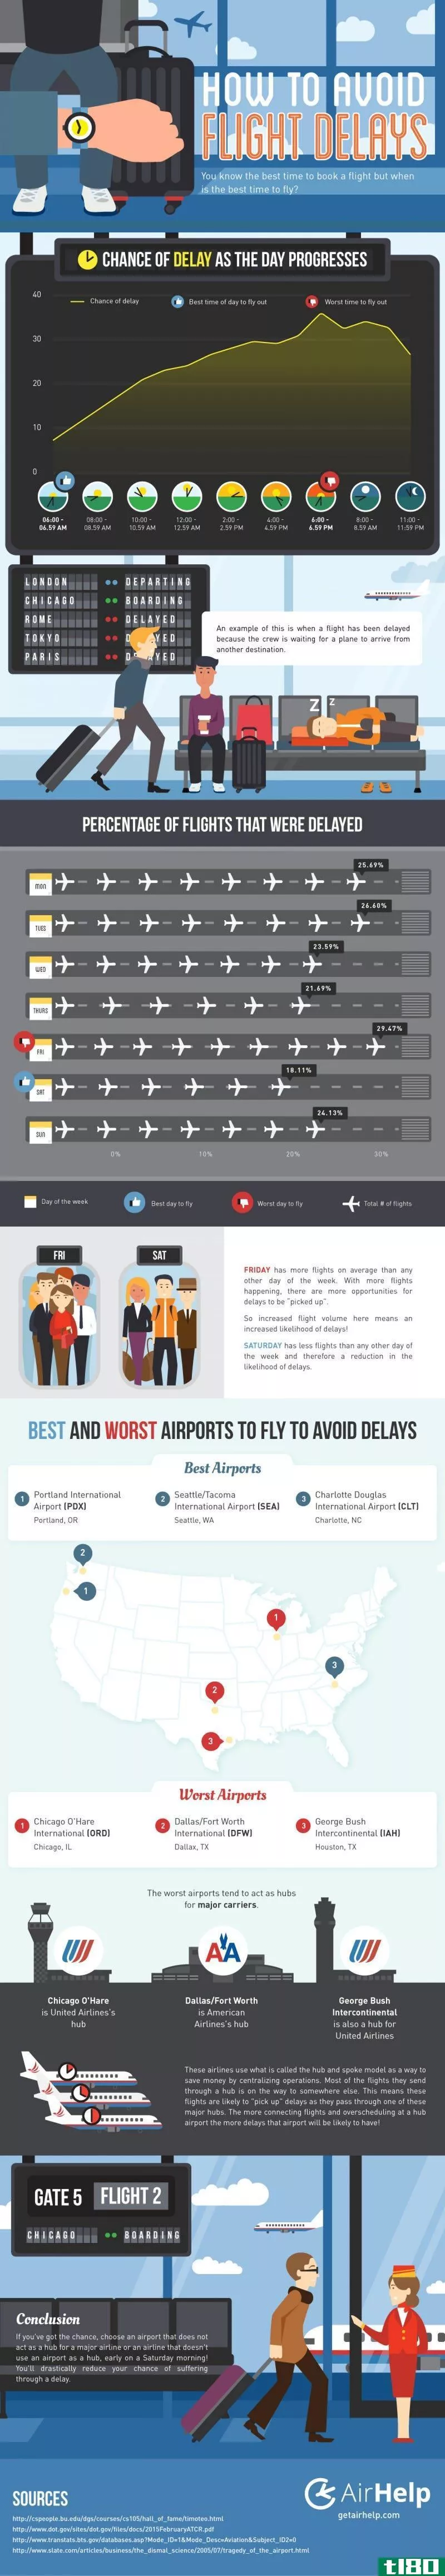 Illustration for article titled This Graphic Shows When to Travel If You Want to Avoid Flight Delays